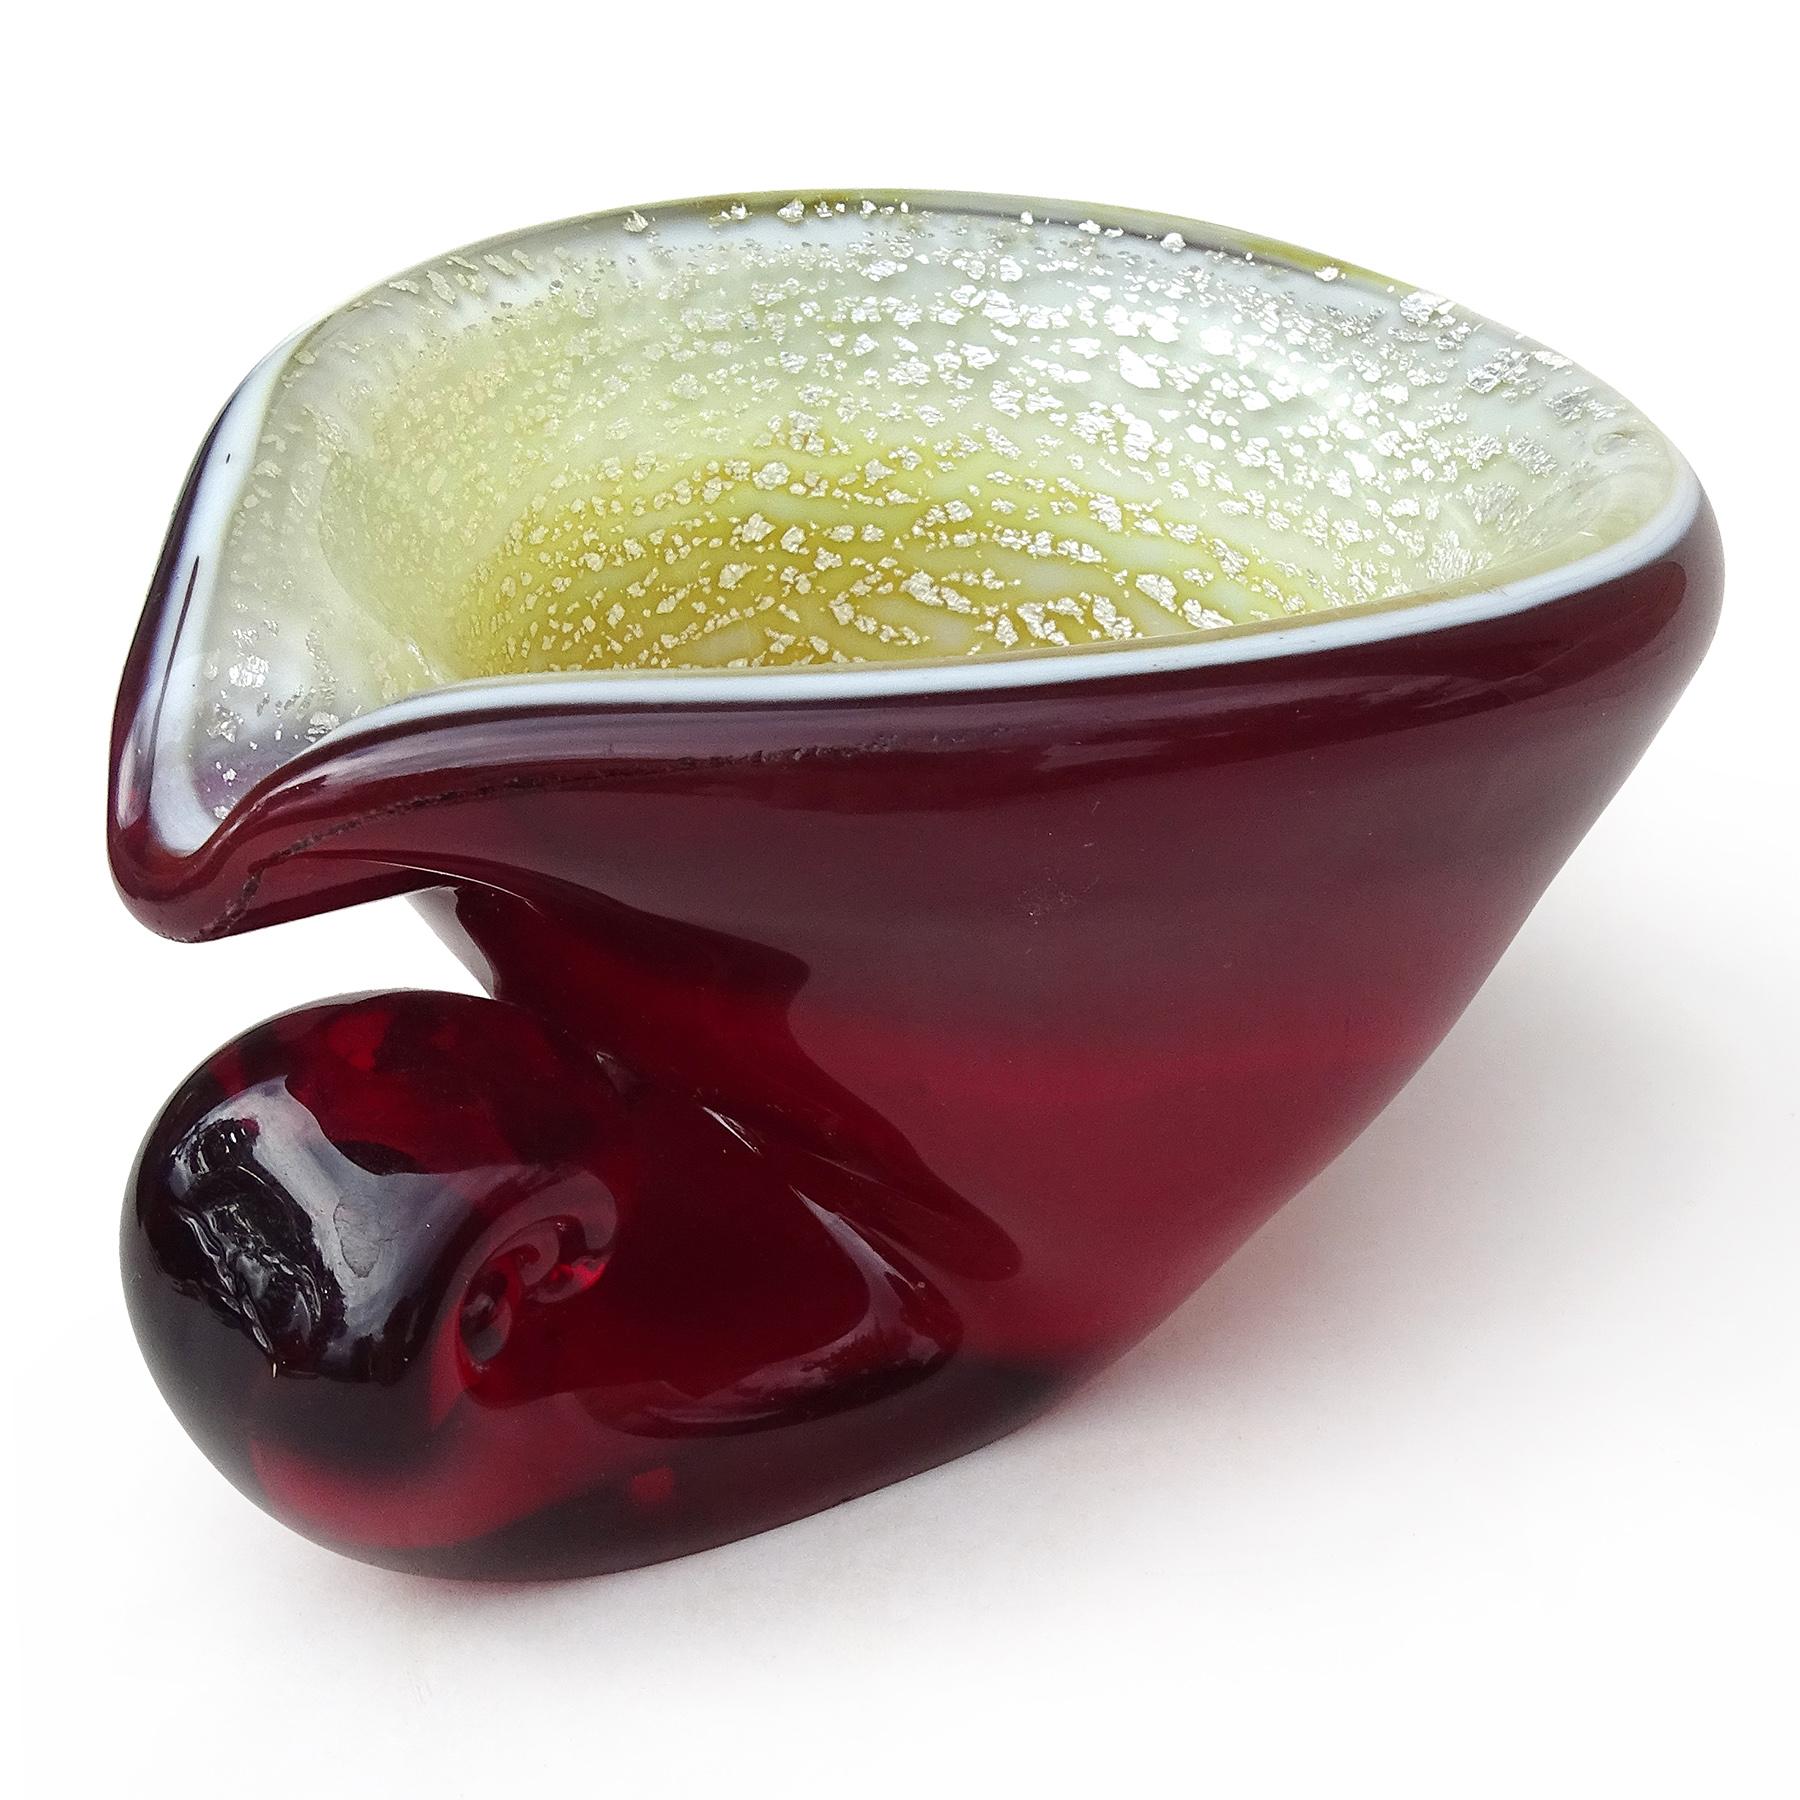 Beautiful vintage Murano hand blown red, silver flecks Italian art glass seashell shaped sculptural ashtray / trinket bowl. Documented to the A.Ve.M. (Arte Vetraria Muranese) company and attributed to designer Giulio Radi. The shell has a dark red